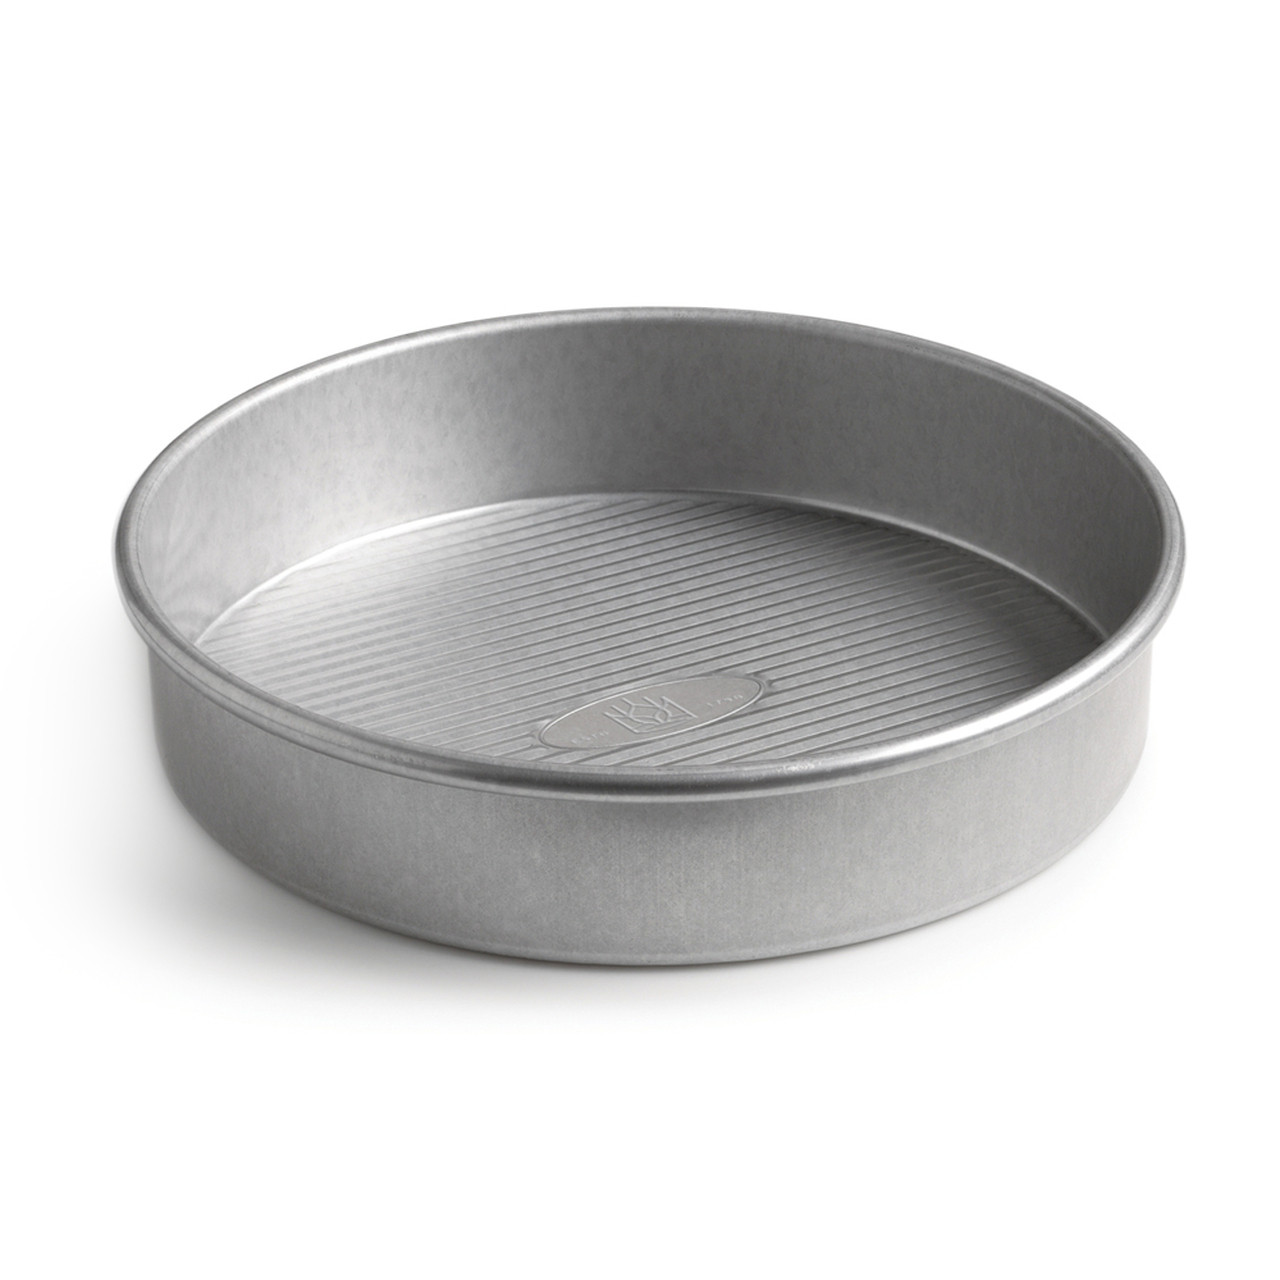 Round Cake Pan with Removable Bottom - 6 x 3